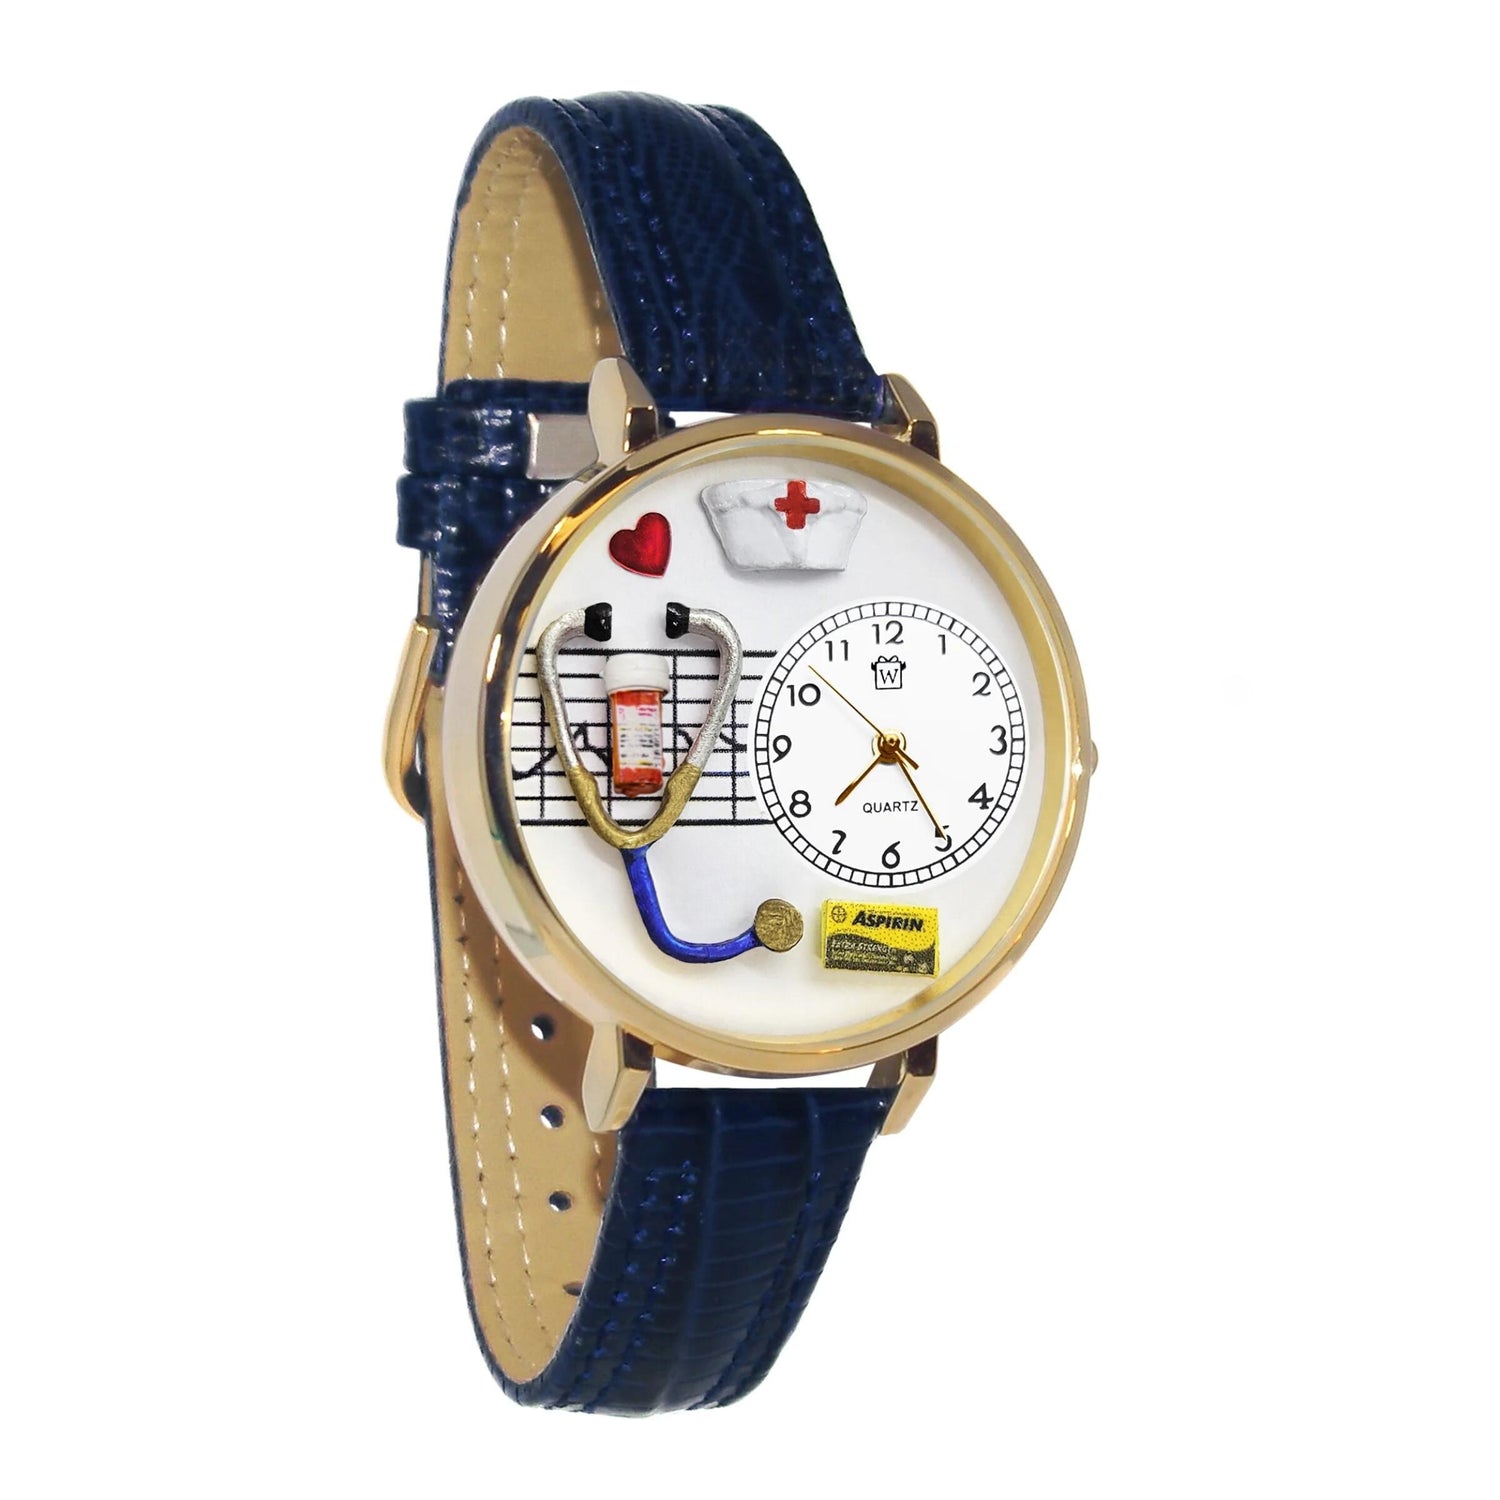 Whimsical Gifts | Nurse Red Cross 3D Watch Large Style | Handmade in USA | Professions Themed | Nurse | Novelty Unique Fun Miniatures Gift | Gold Finish Navy Blue Leather Watch Band